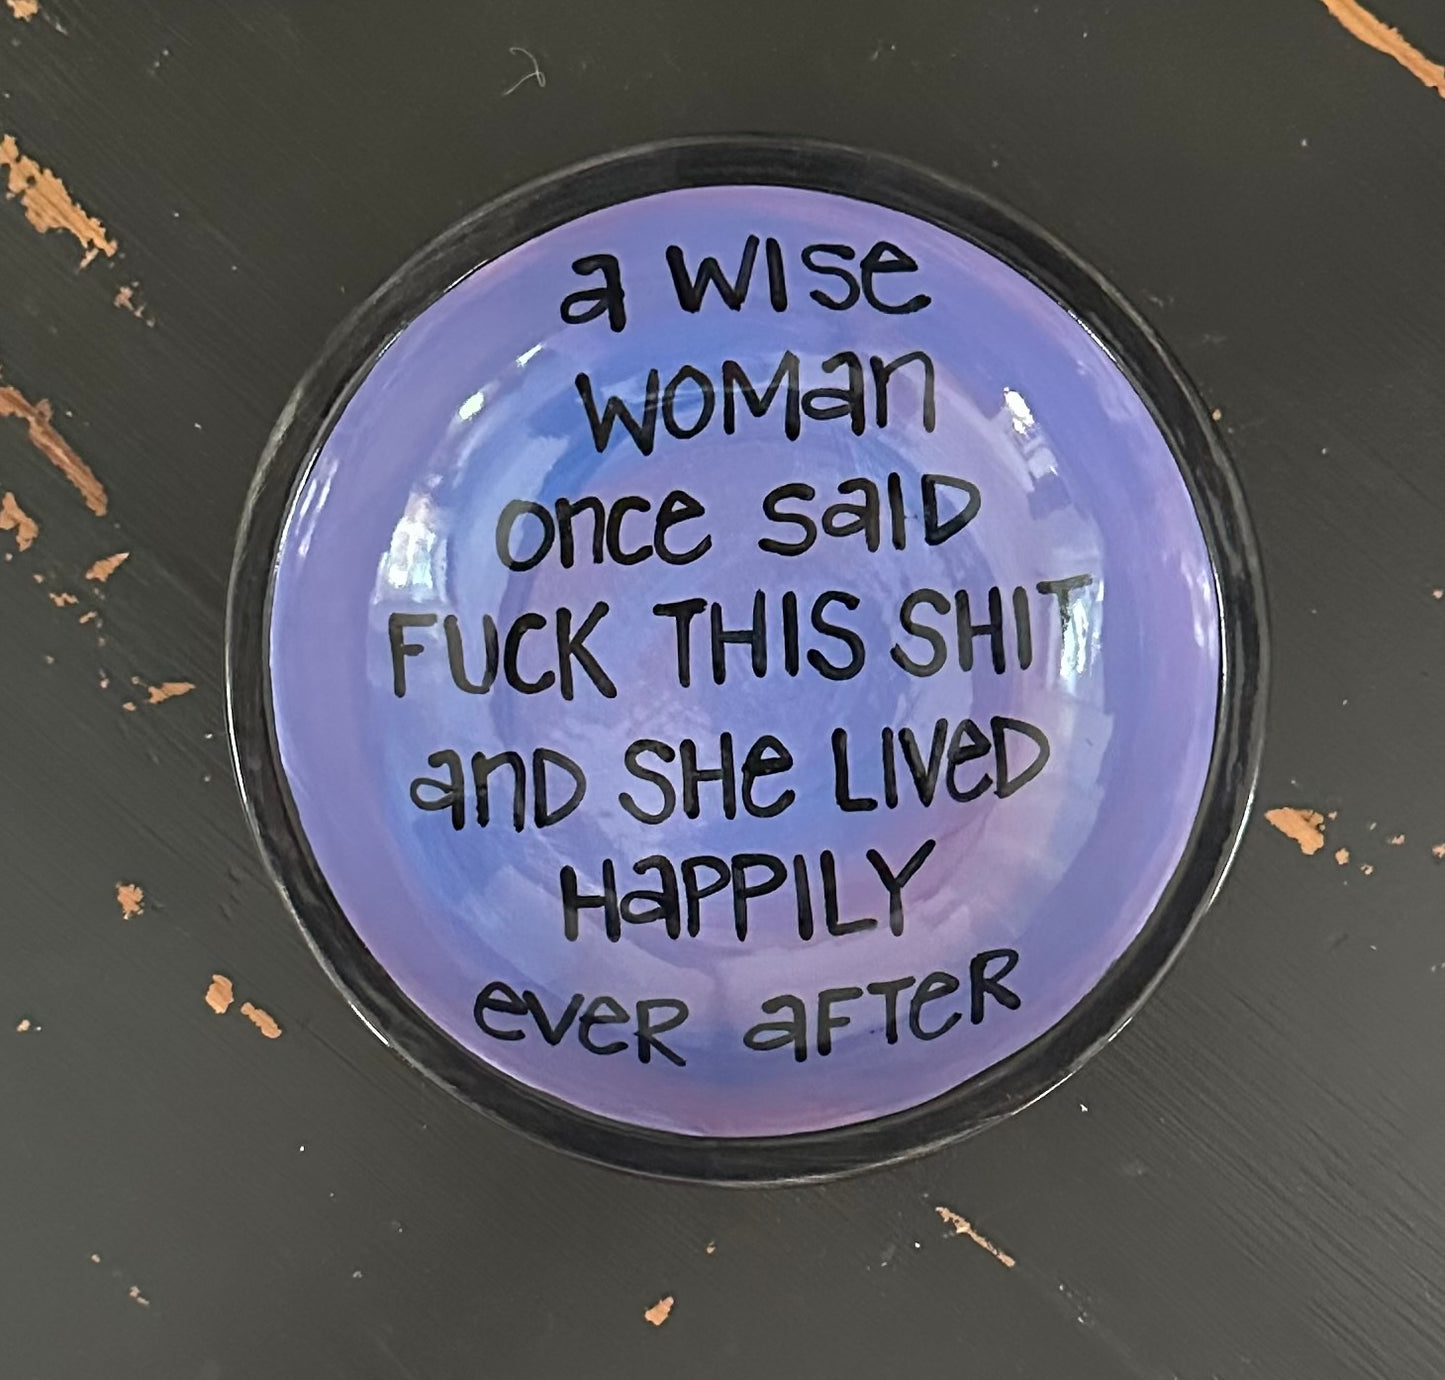 Wise Woman Funny Quote Dish